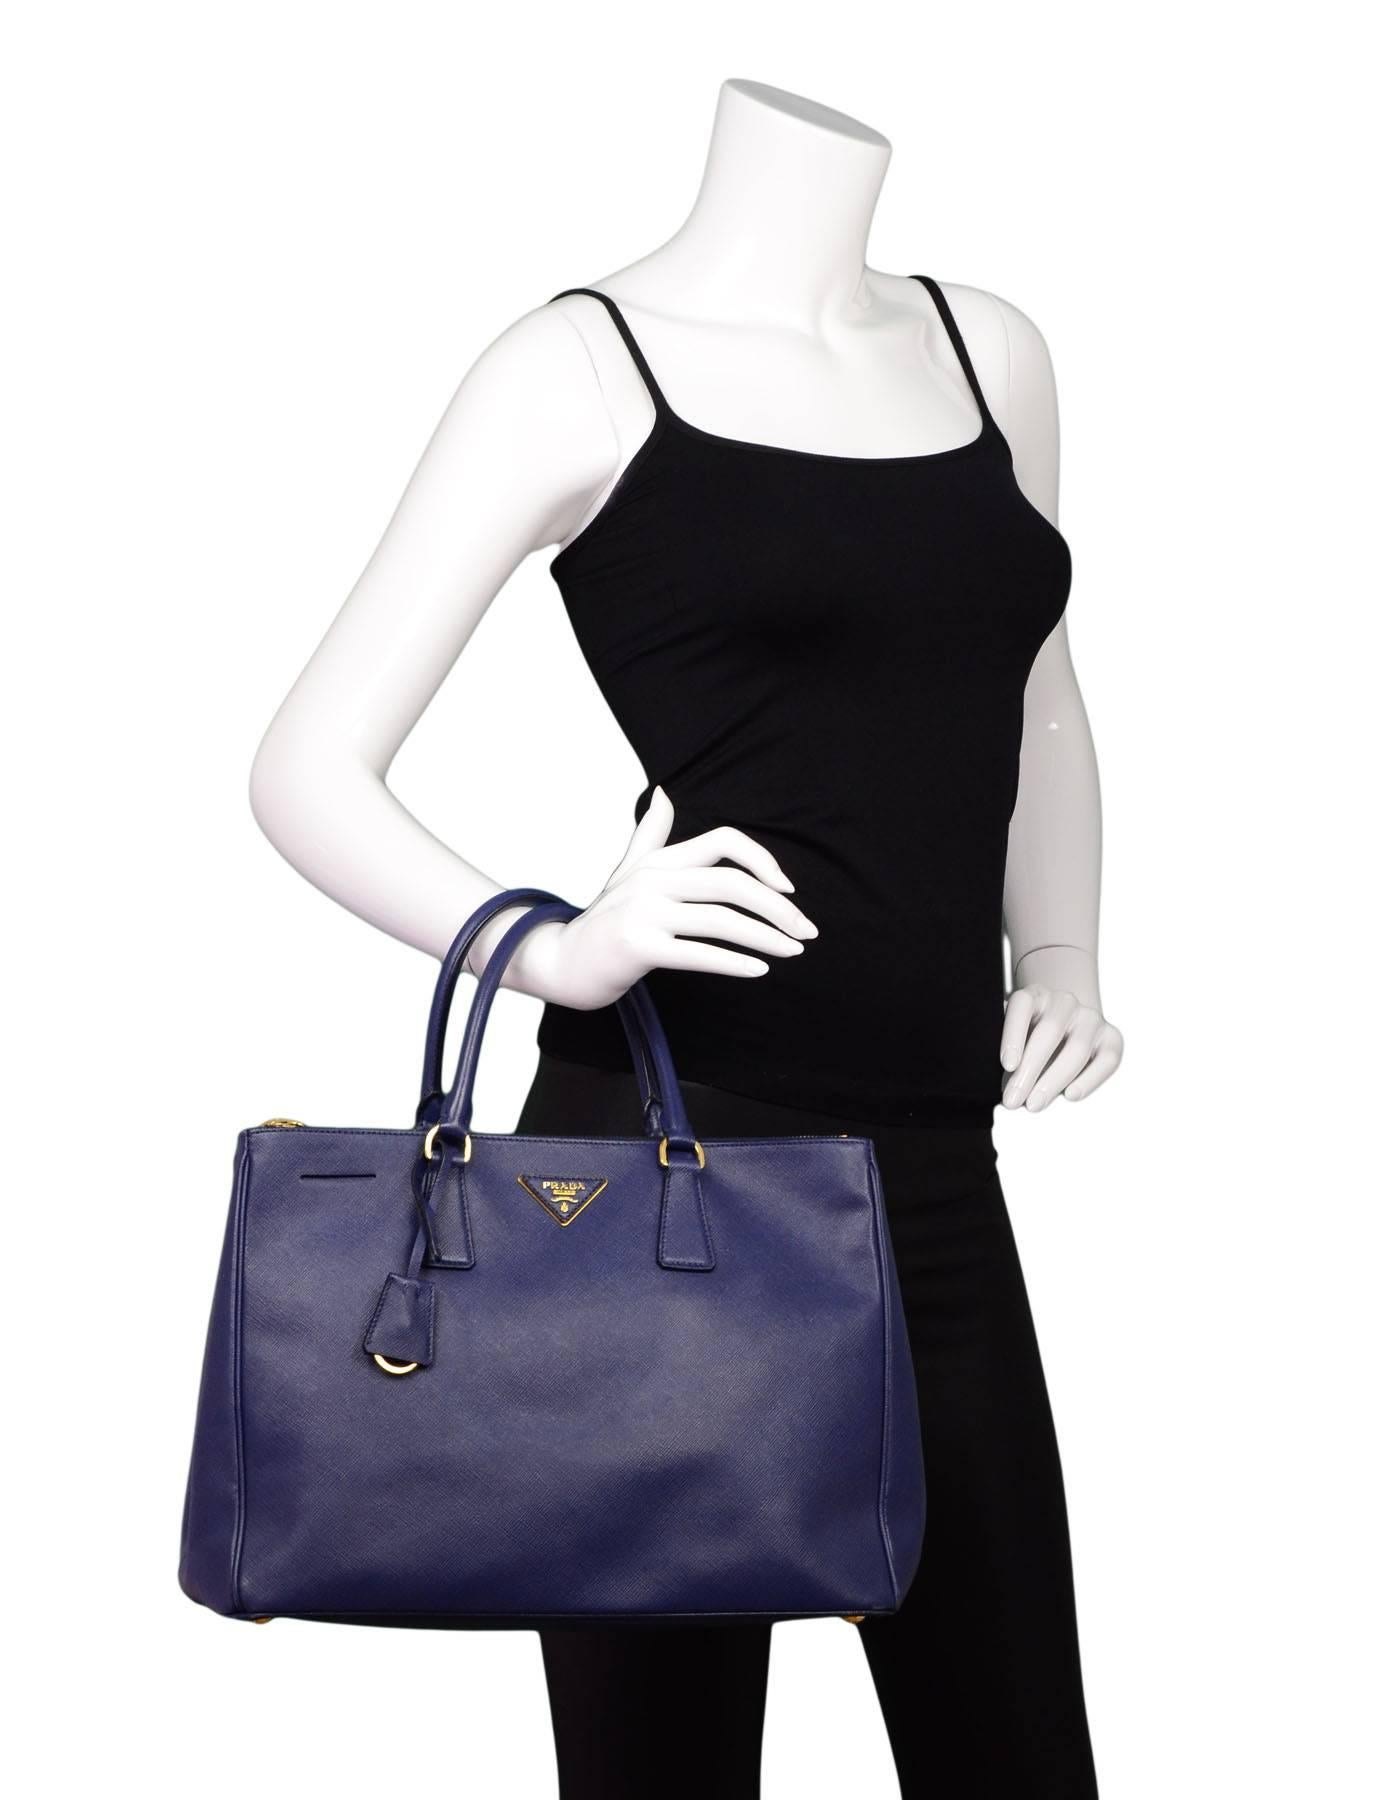 Prada Blue Saffiano Tote with GHW

Made In: Italy
Color: Blue
Hardware: Goldtone
Materials: Saffiano leather, metal
Lining: Blue textile
Closure/Opening: Open top
Exterior Pockets: None
Interior Pockets: Two zip compartments, three wall pockets, one